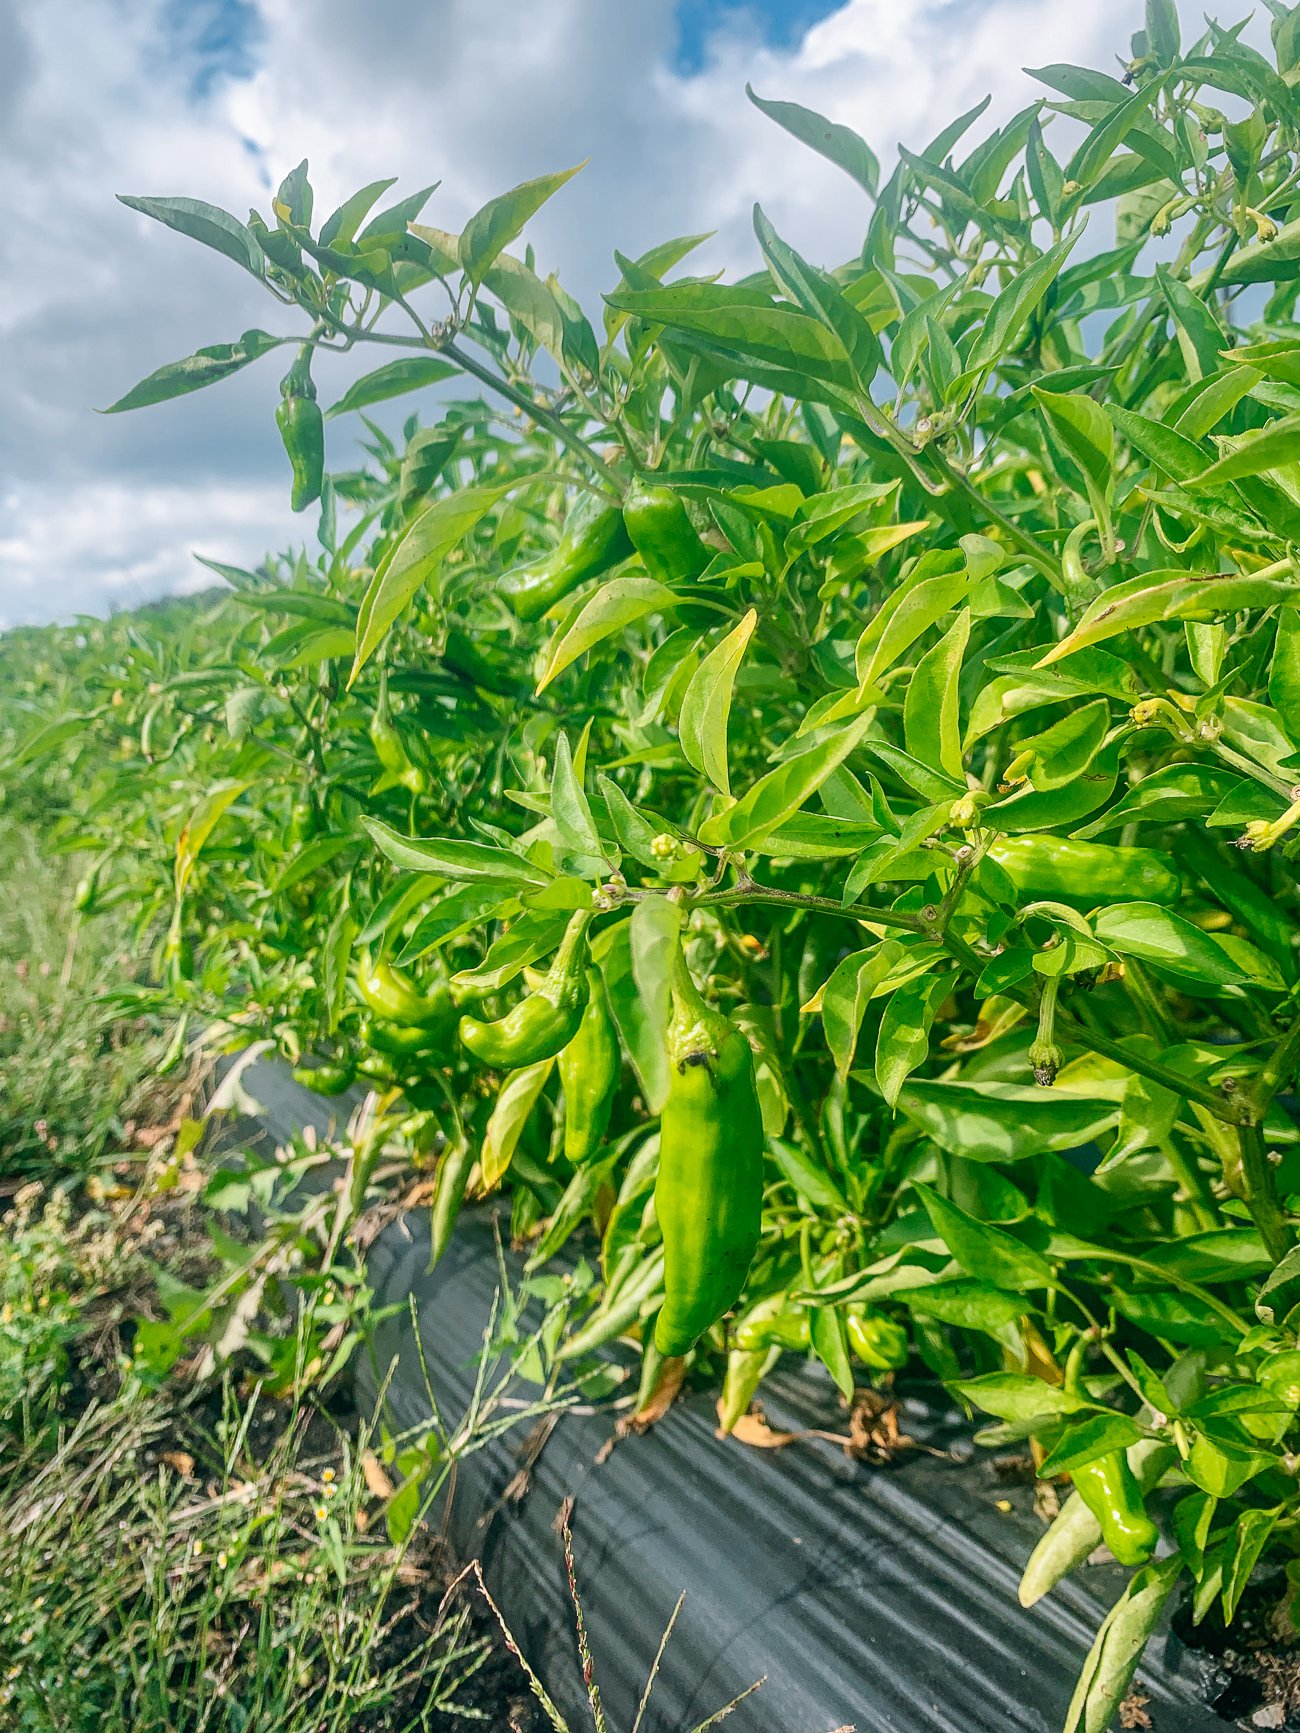 shishito peppers growing on plant